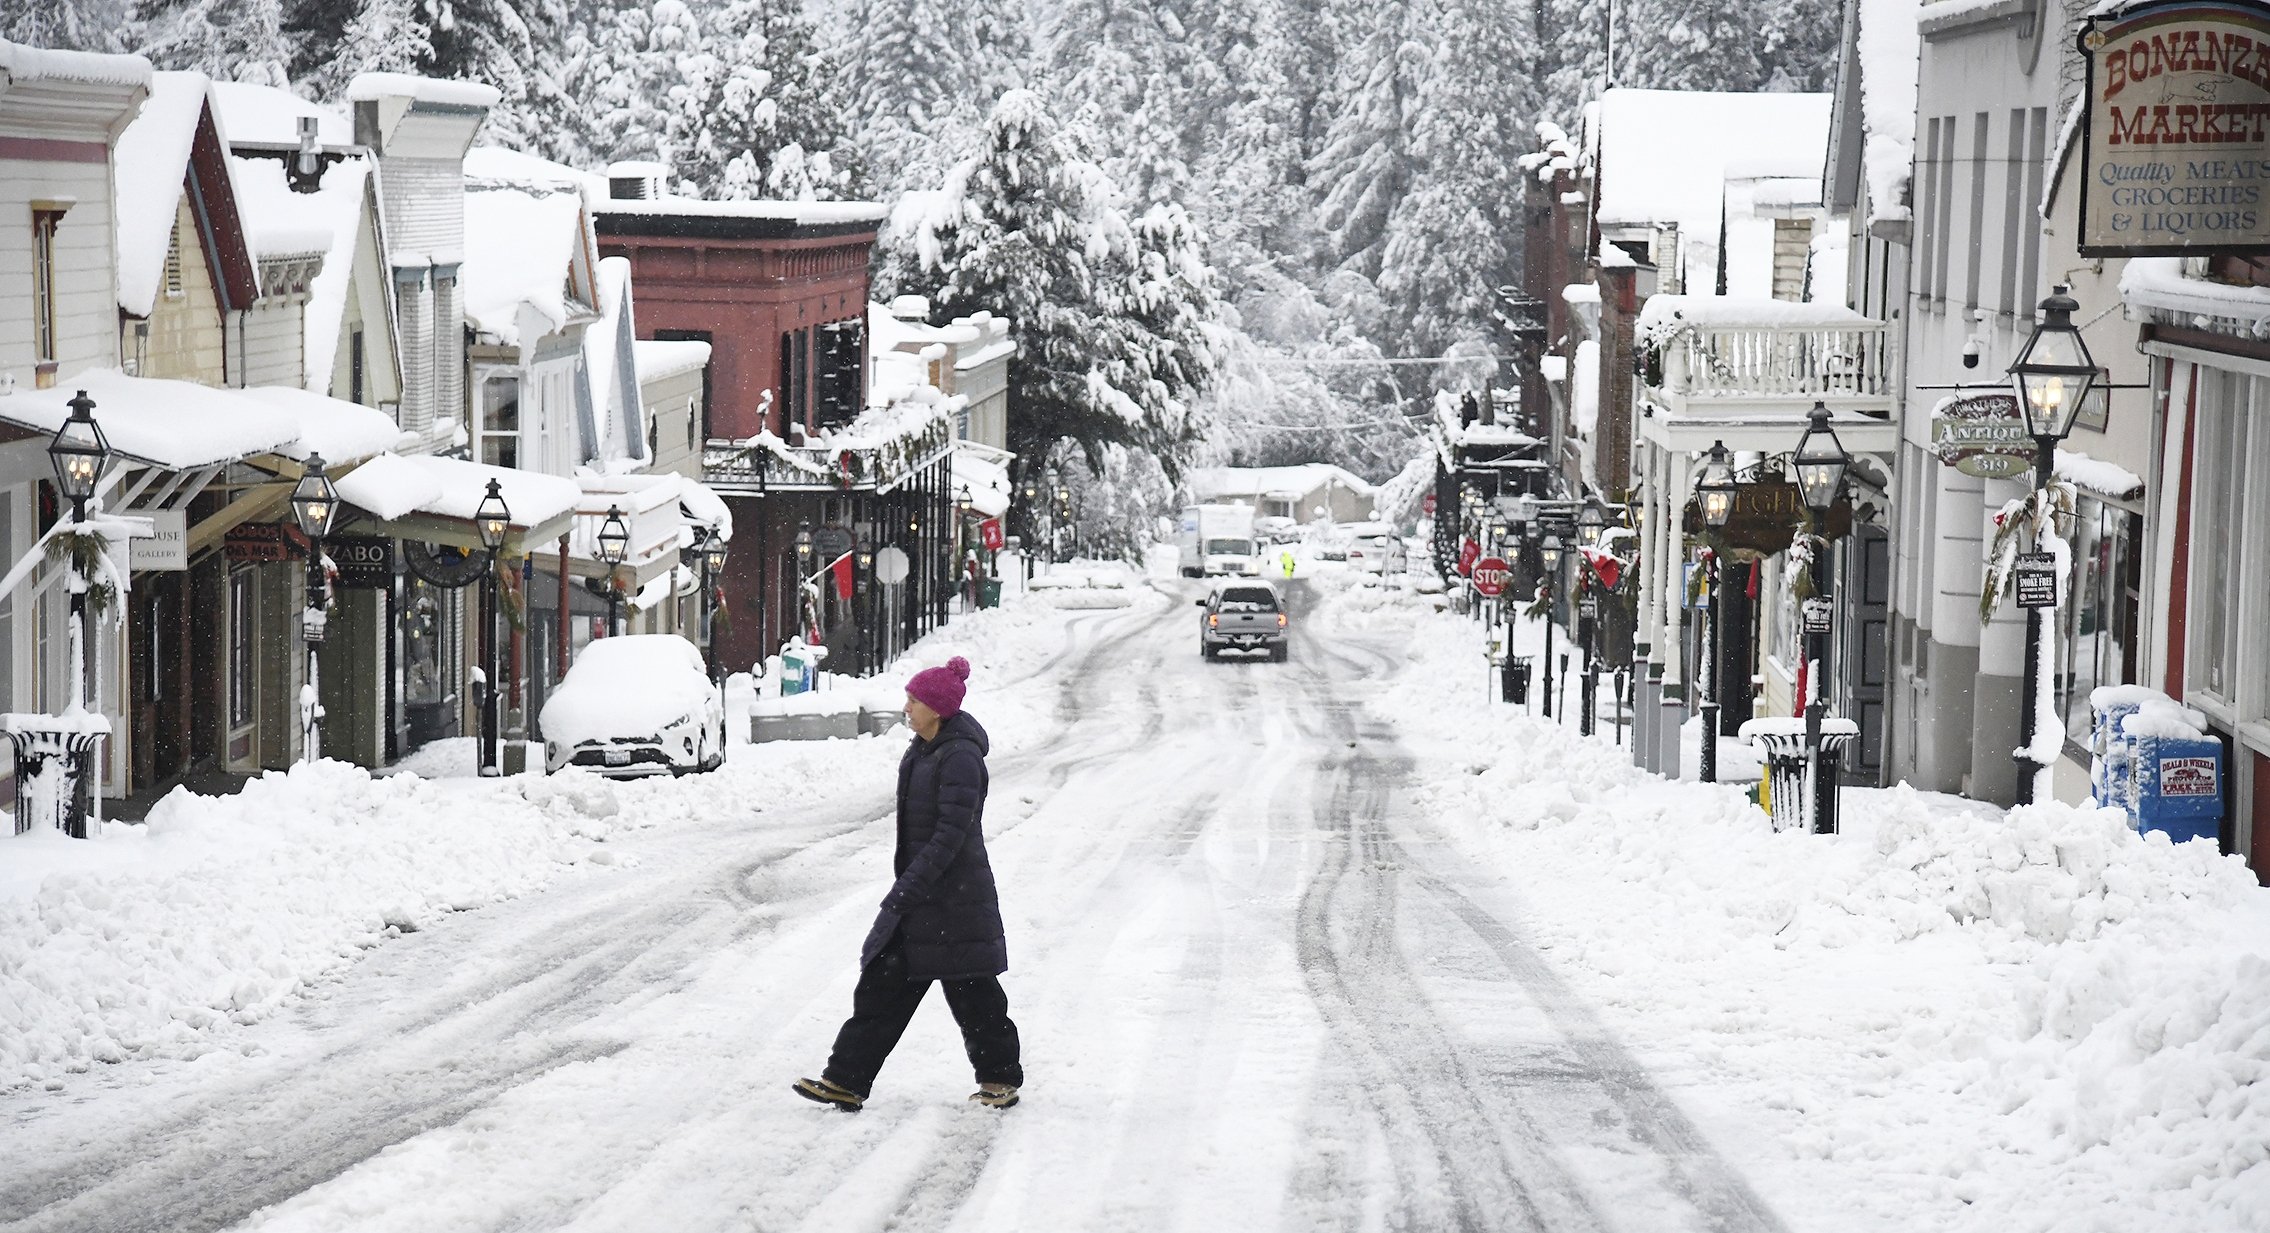 While snowfall was picturesque in places such as along Broad Street in Nevada City, California, it was dangerous for many others who were without electricity or stuck in the snow, U.S, Dec. 27, 2021. (AP Photo)